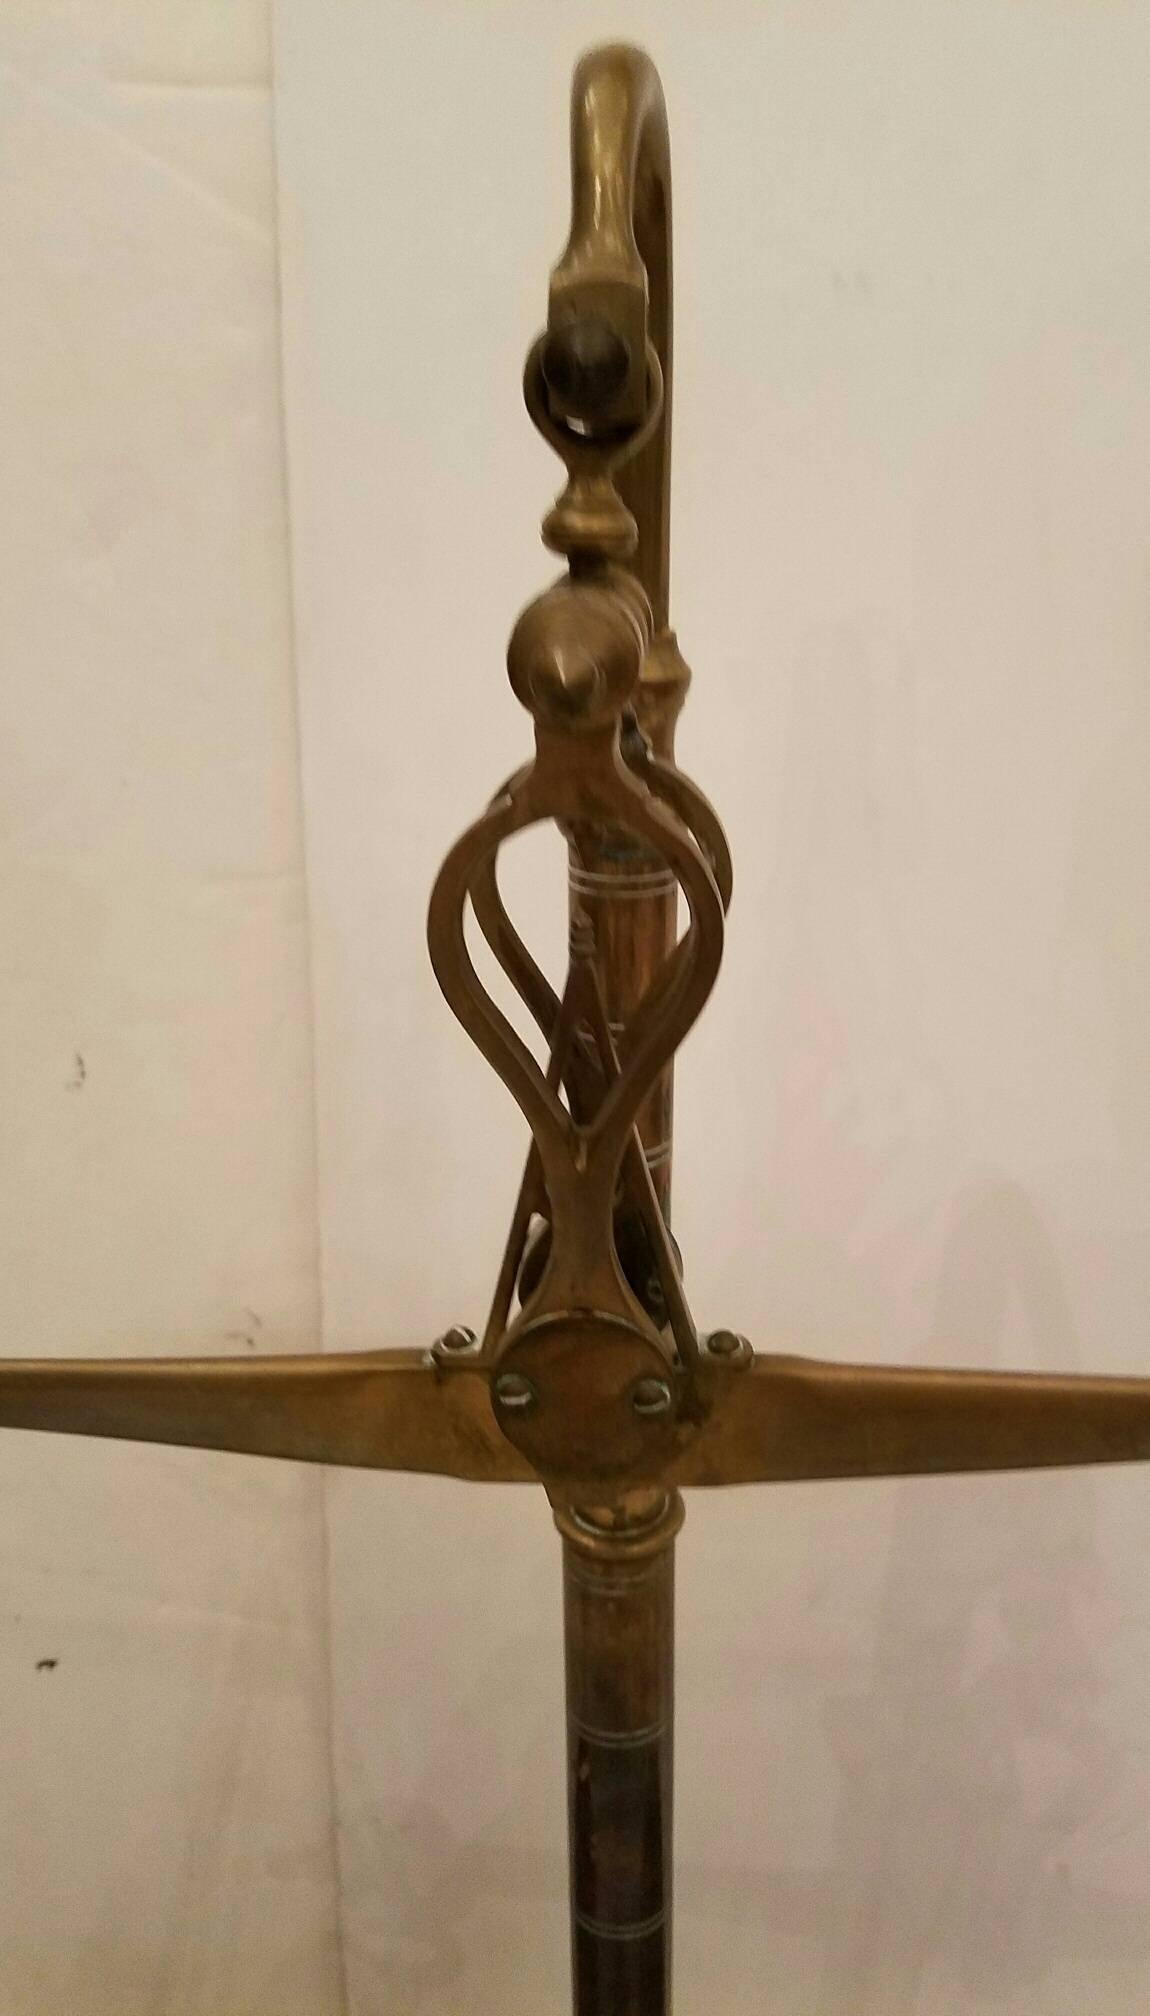 Antique brass balance or beam scale.